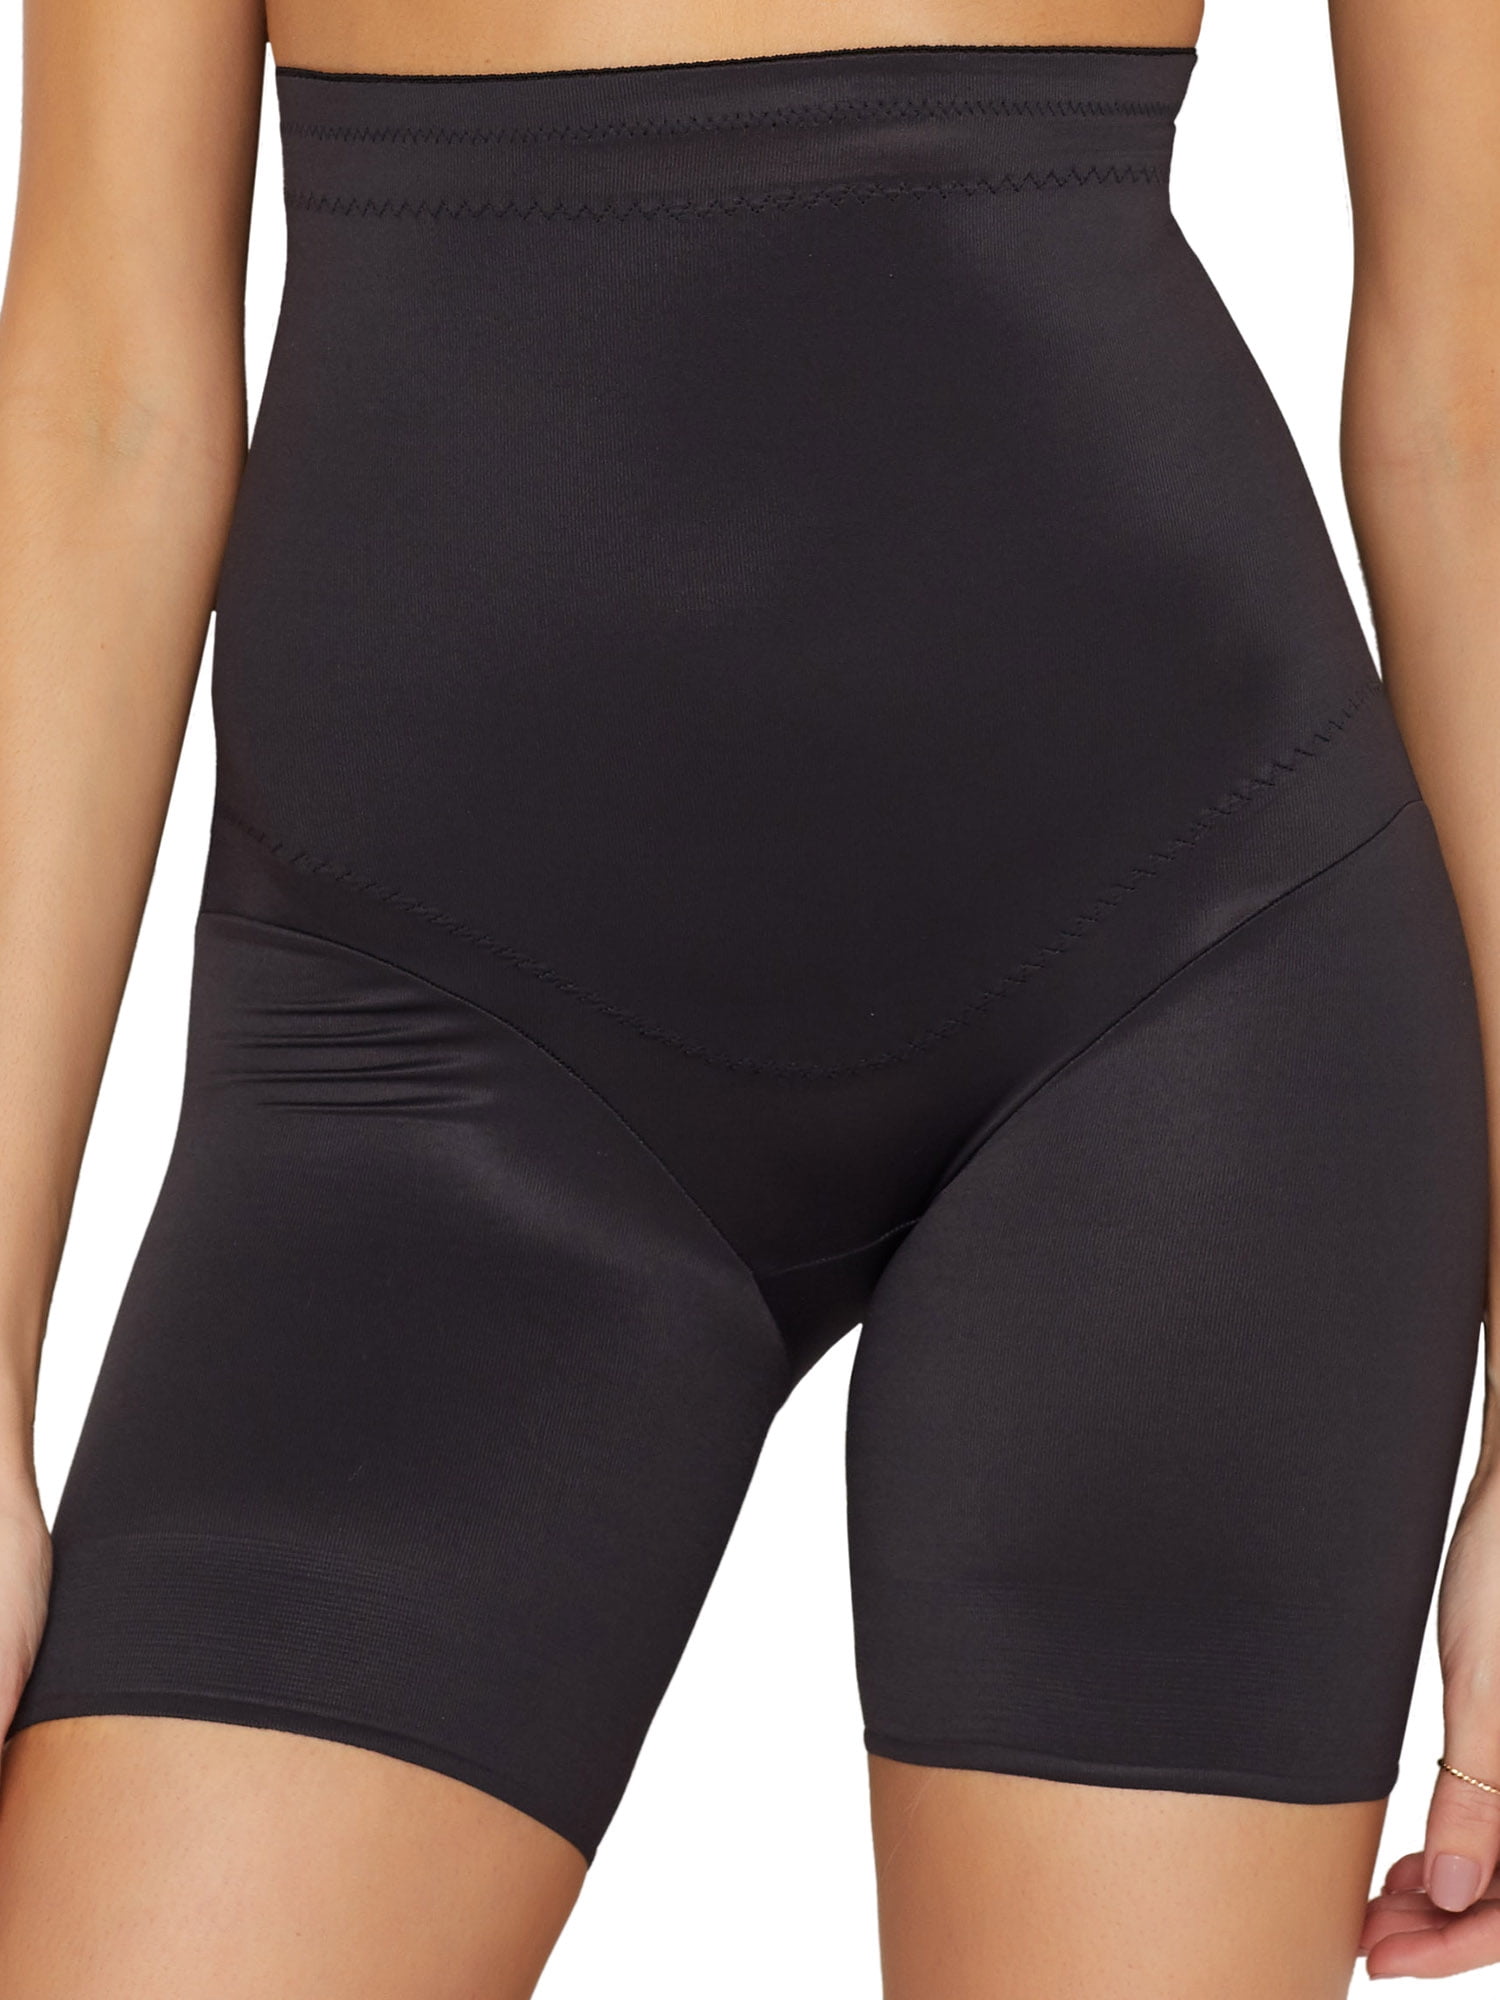 Miraclesuit Womens Flexible Fit Firm Control High-Waist Thigh